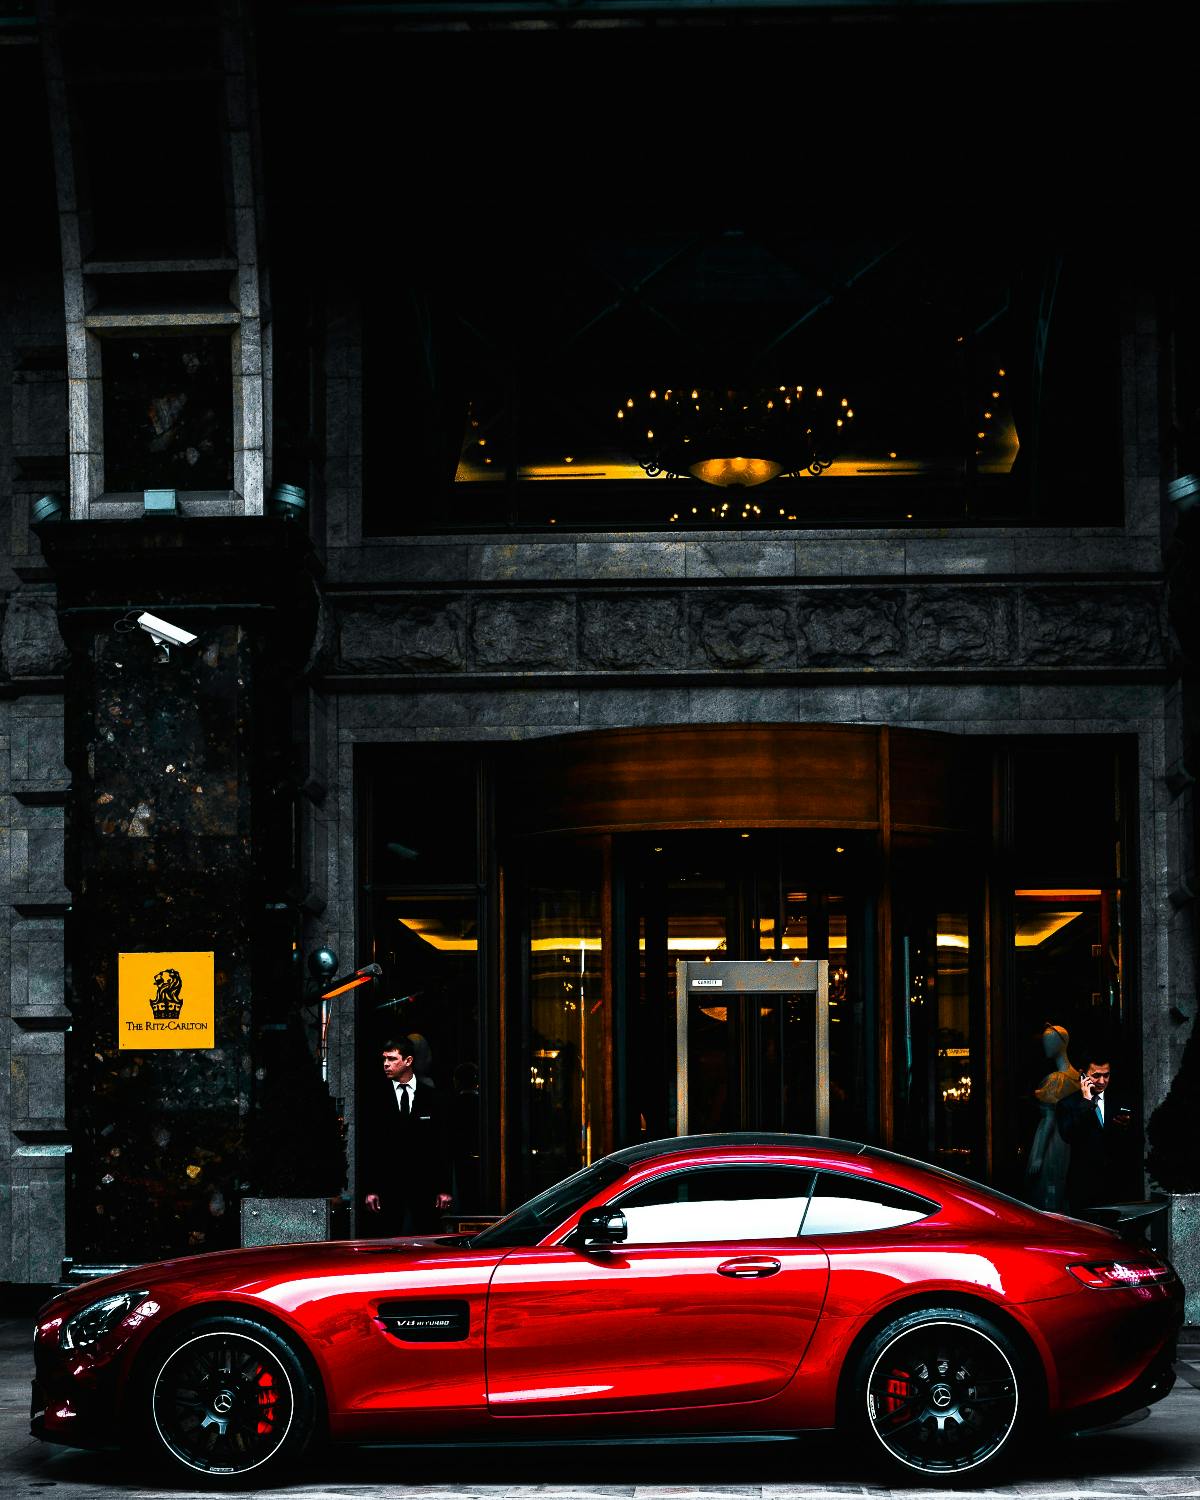 A red sports car in front of a luxury apartment building.